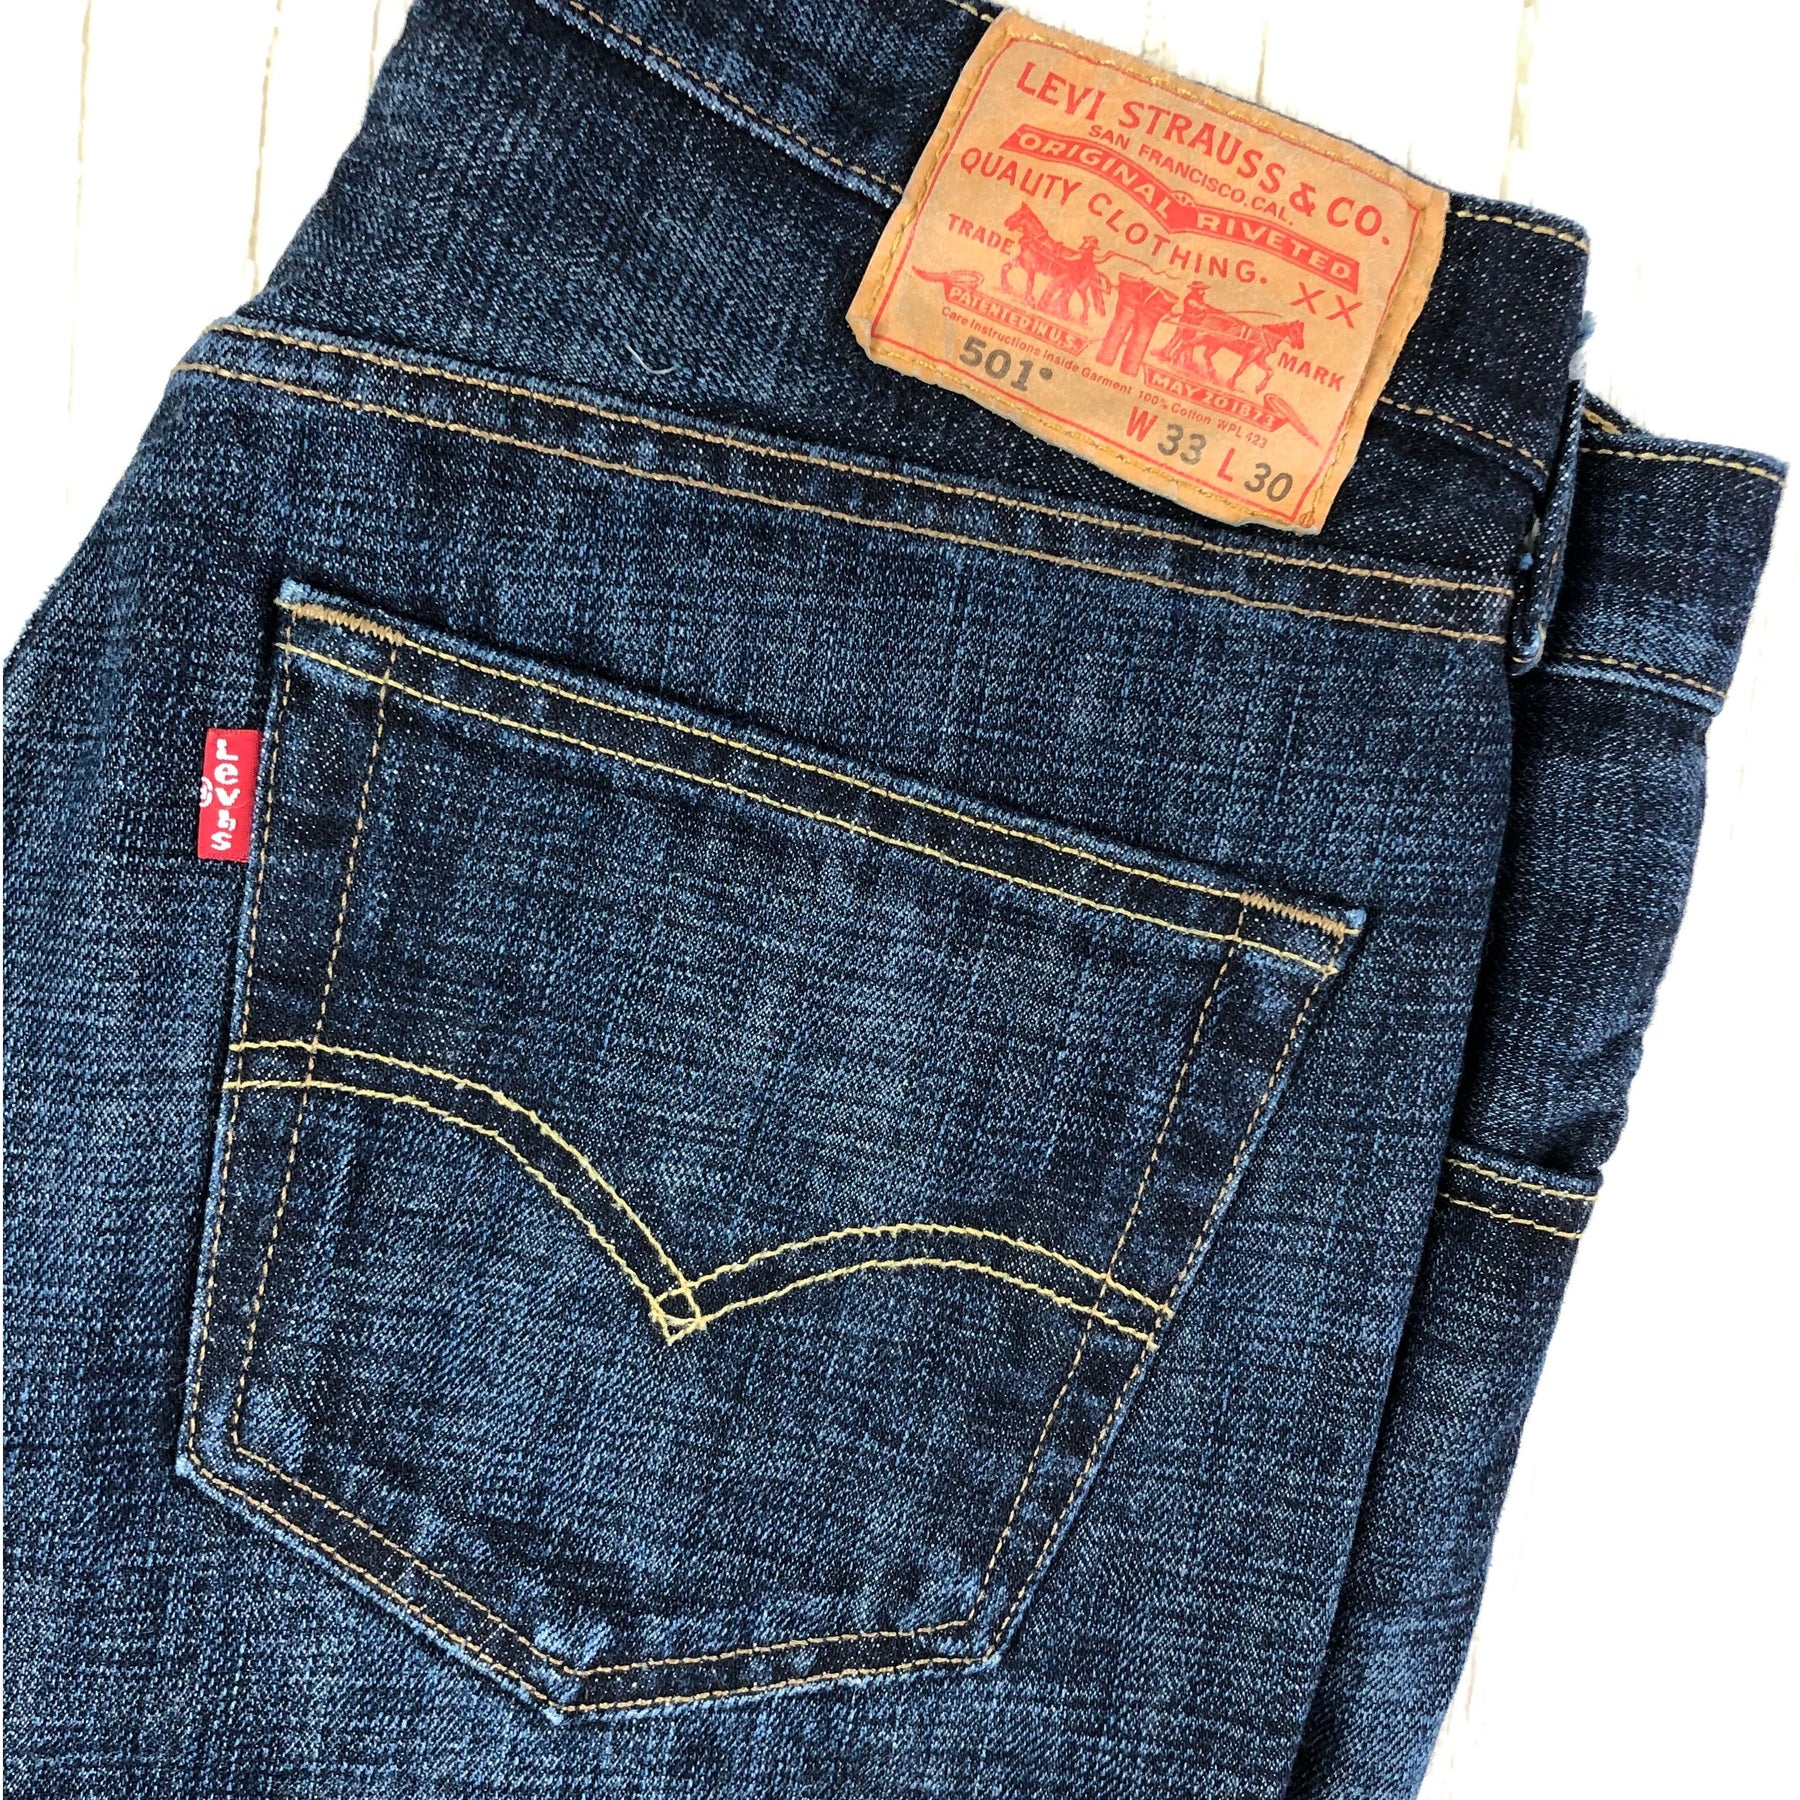 levis 501 button fly mens jeans the classics